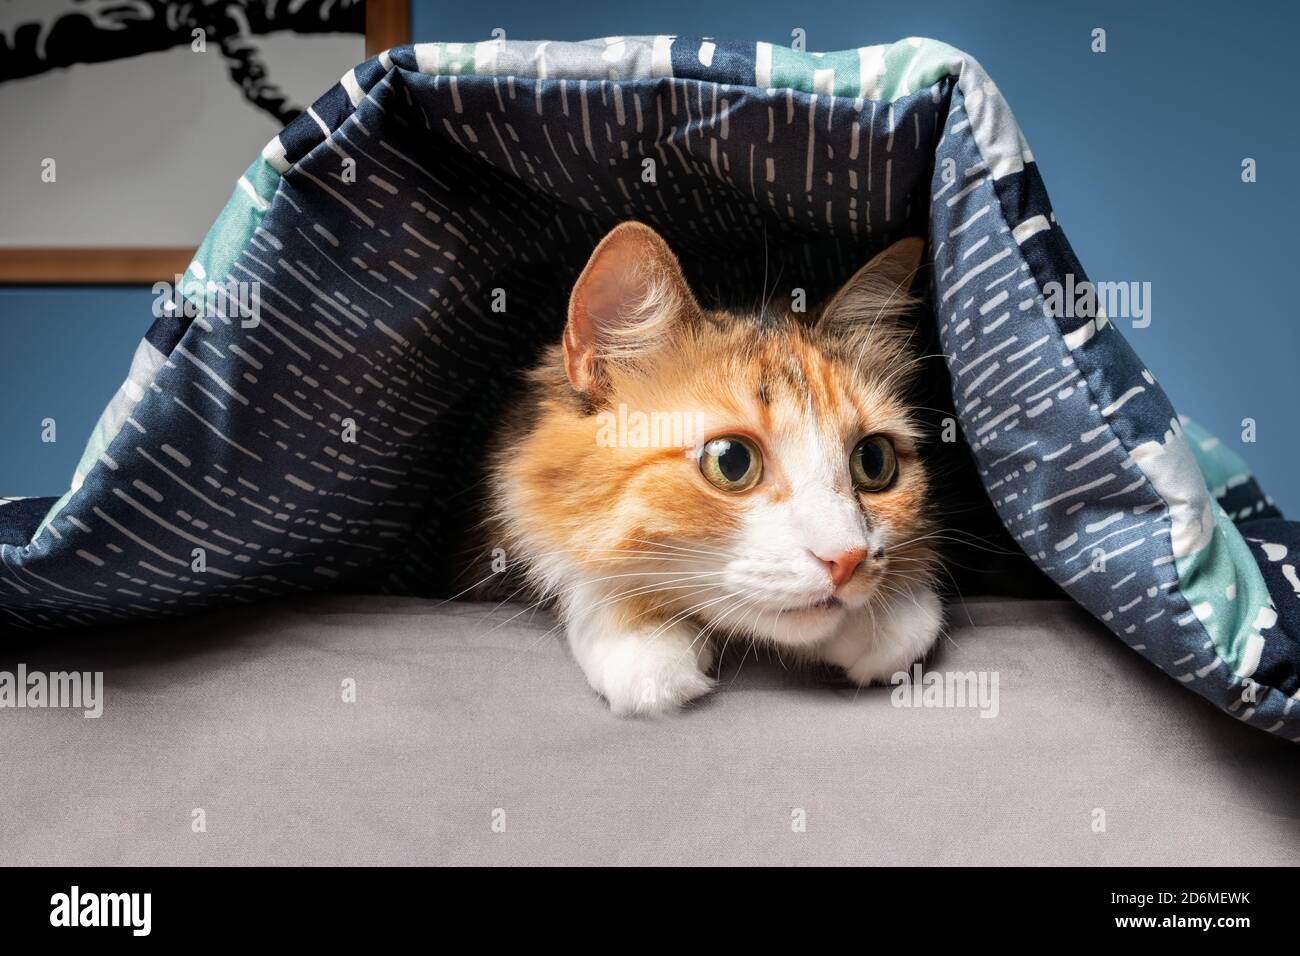 Image Description: A scared aggressive cat hiding under some blankets and towels